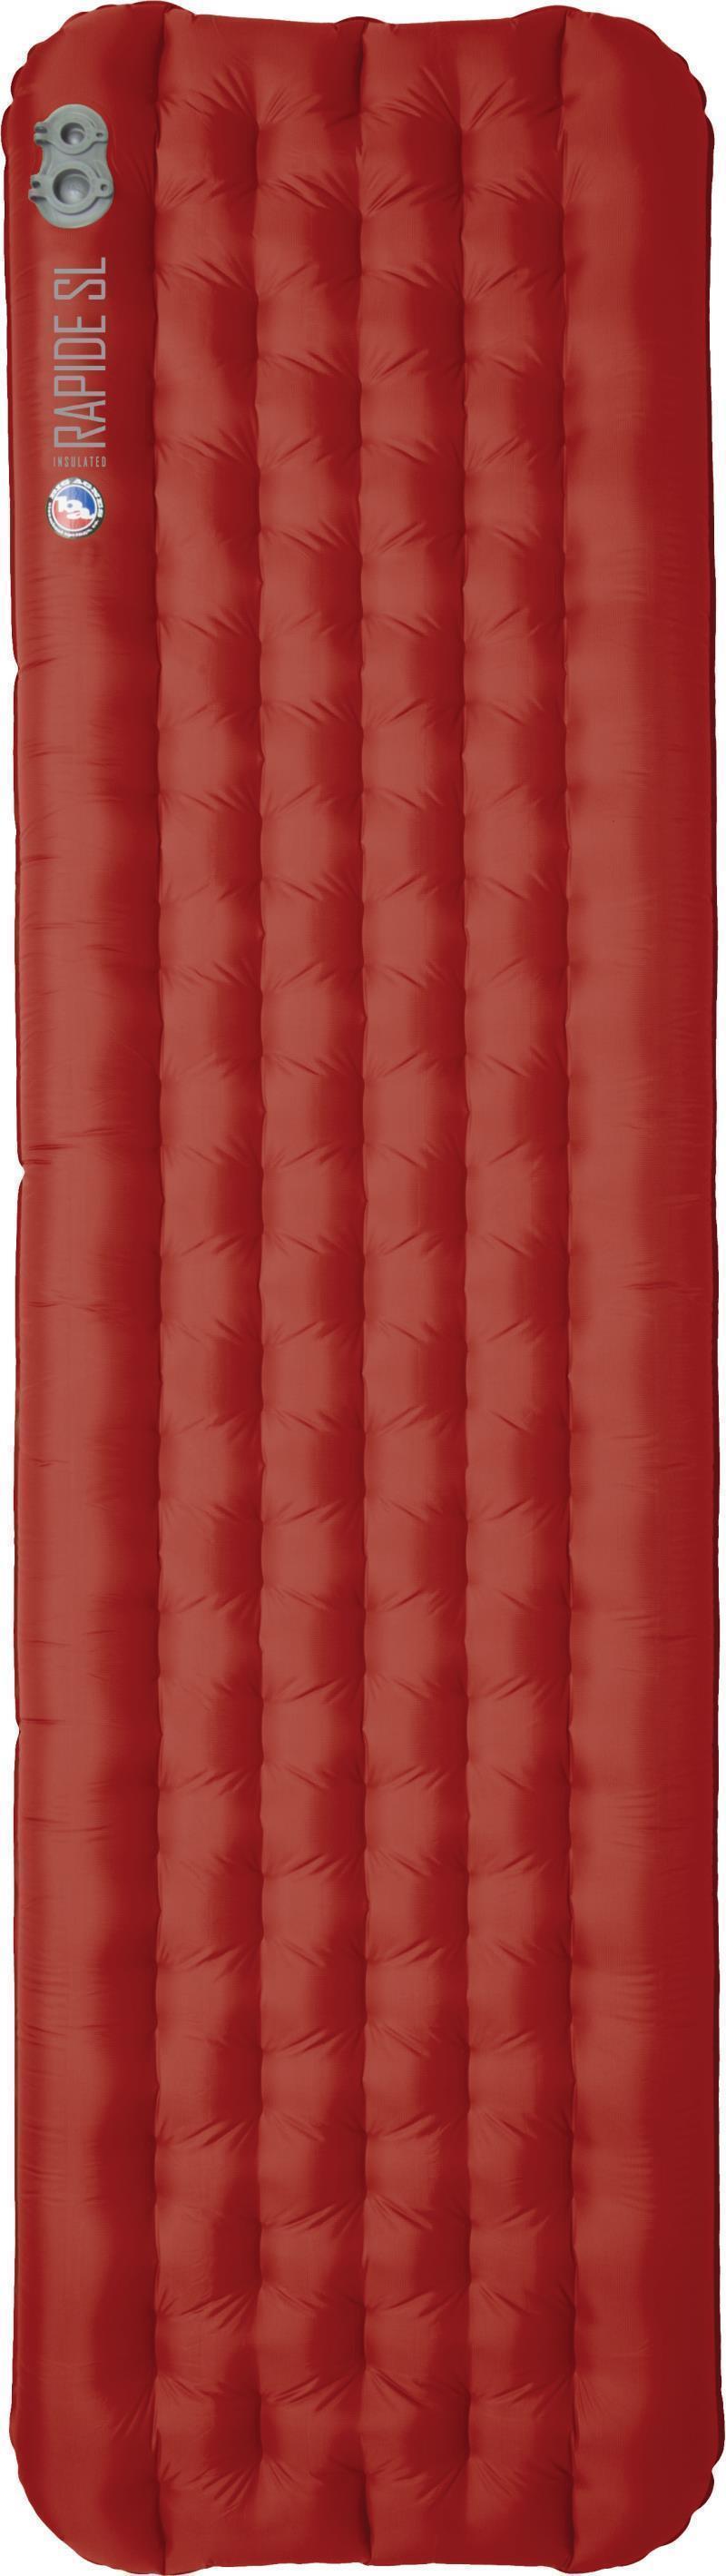 Rapide SL Insulated, Wide Long